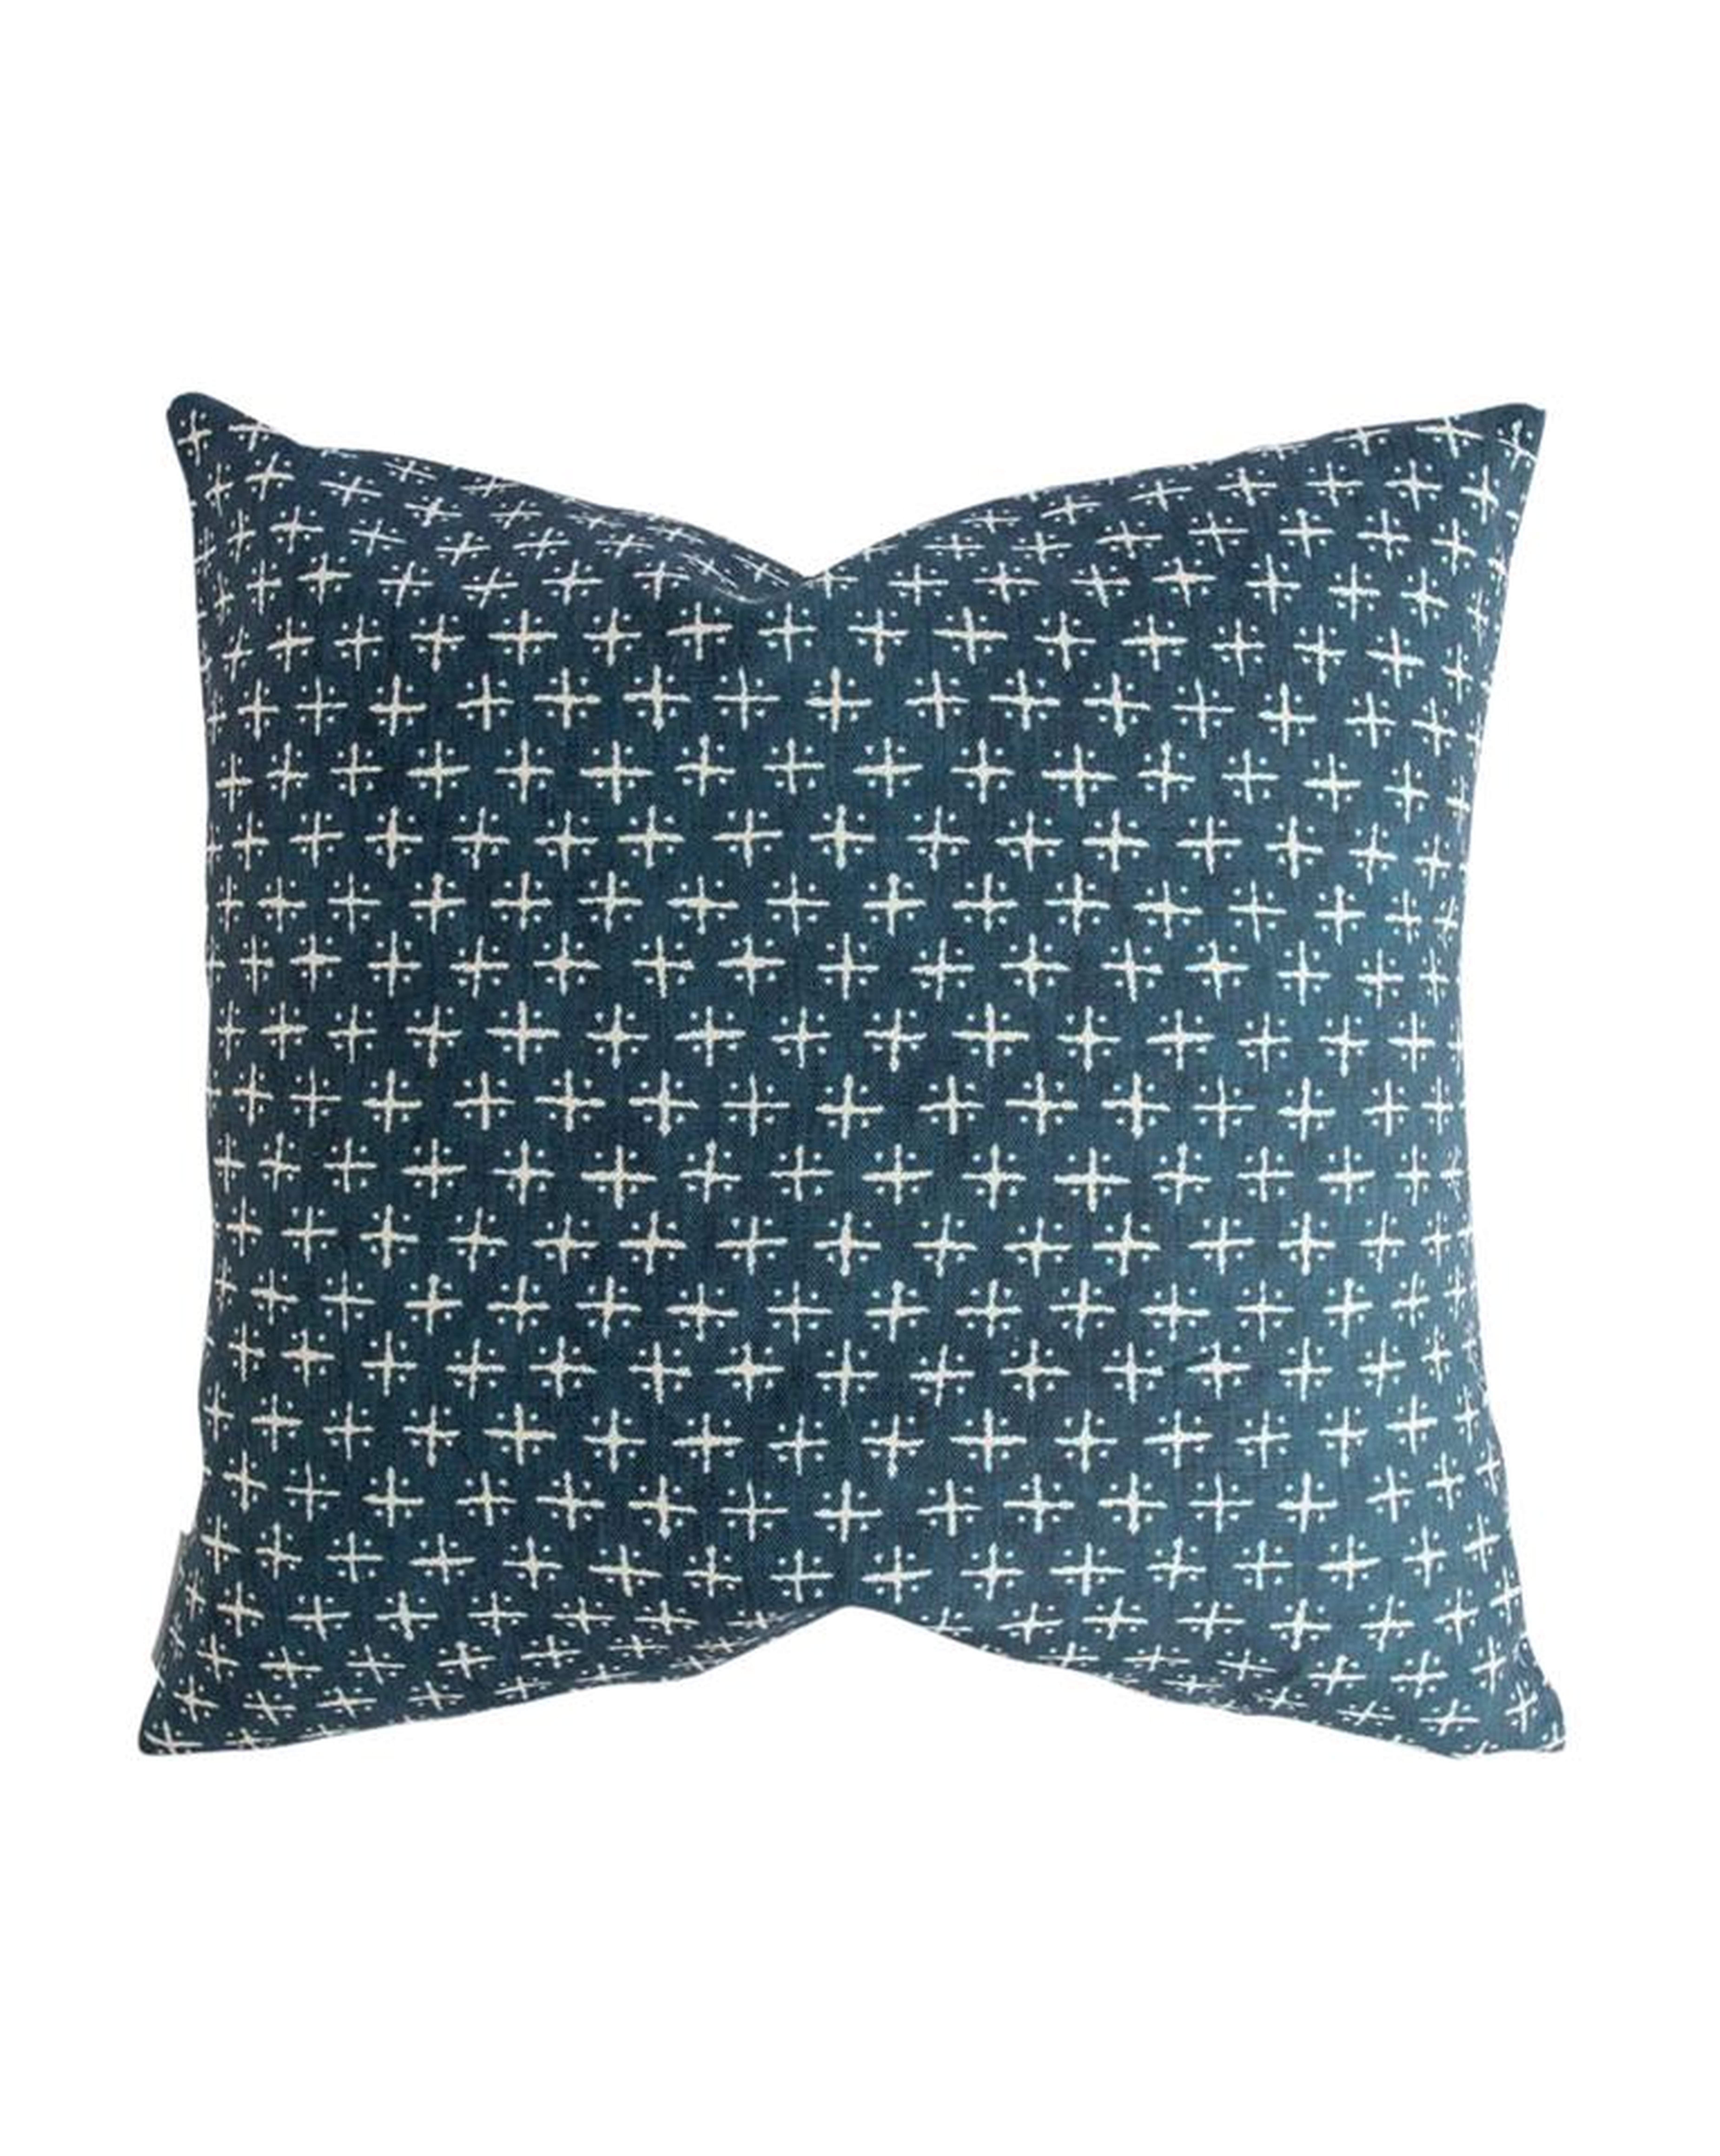 NEWPORT CROSS PILLOW WITHOUT INSERT, 20" x 20" - McGee & Co.